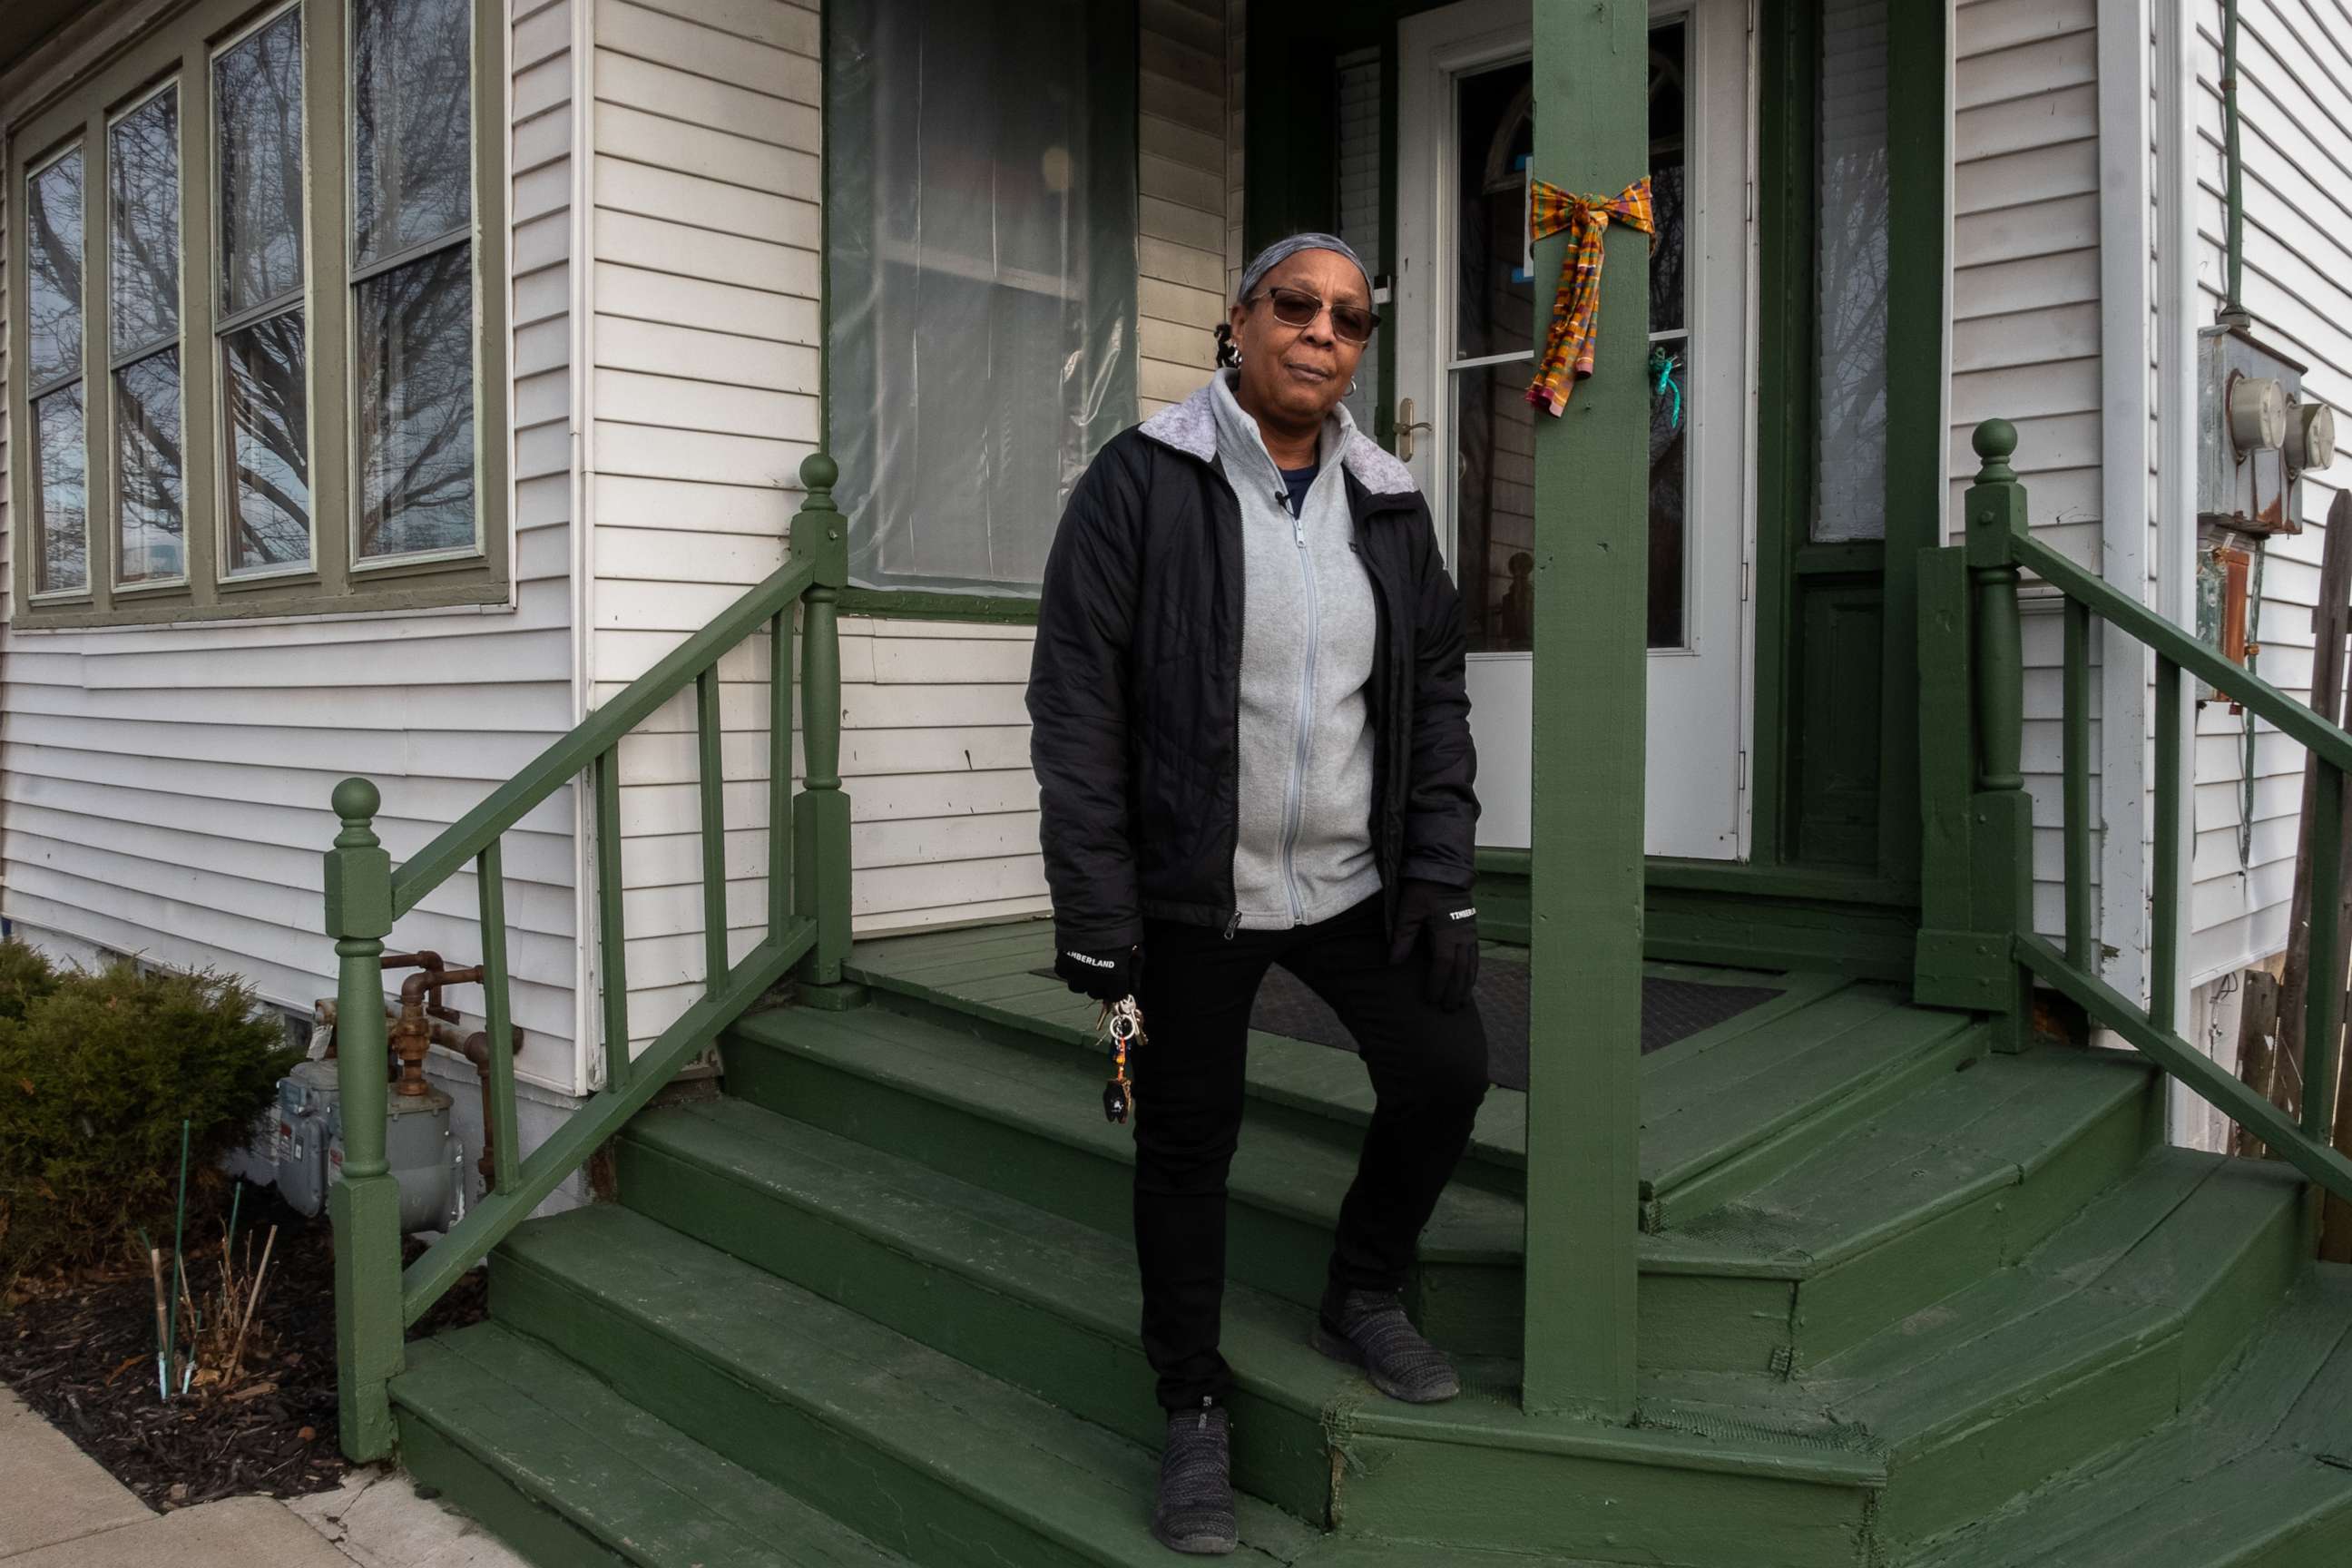 PHOTO: Barbara Massey Mapps stands on the porch of her sister Katherine "Kat" Massey's home in Buffalo, New York. Her sister was among 10 Black people killed in a racially motivated mass shooting at a Buffalo supermarket on May 14, 2022.